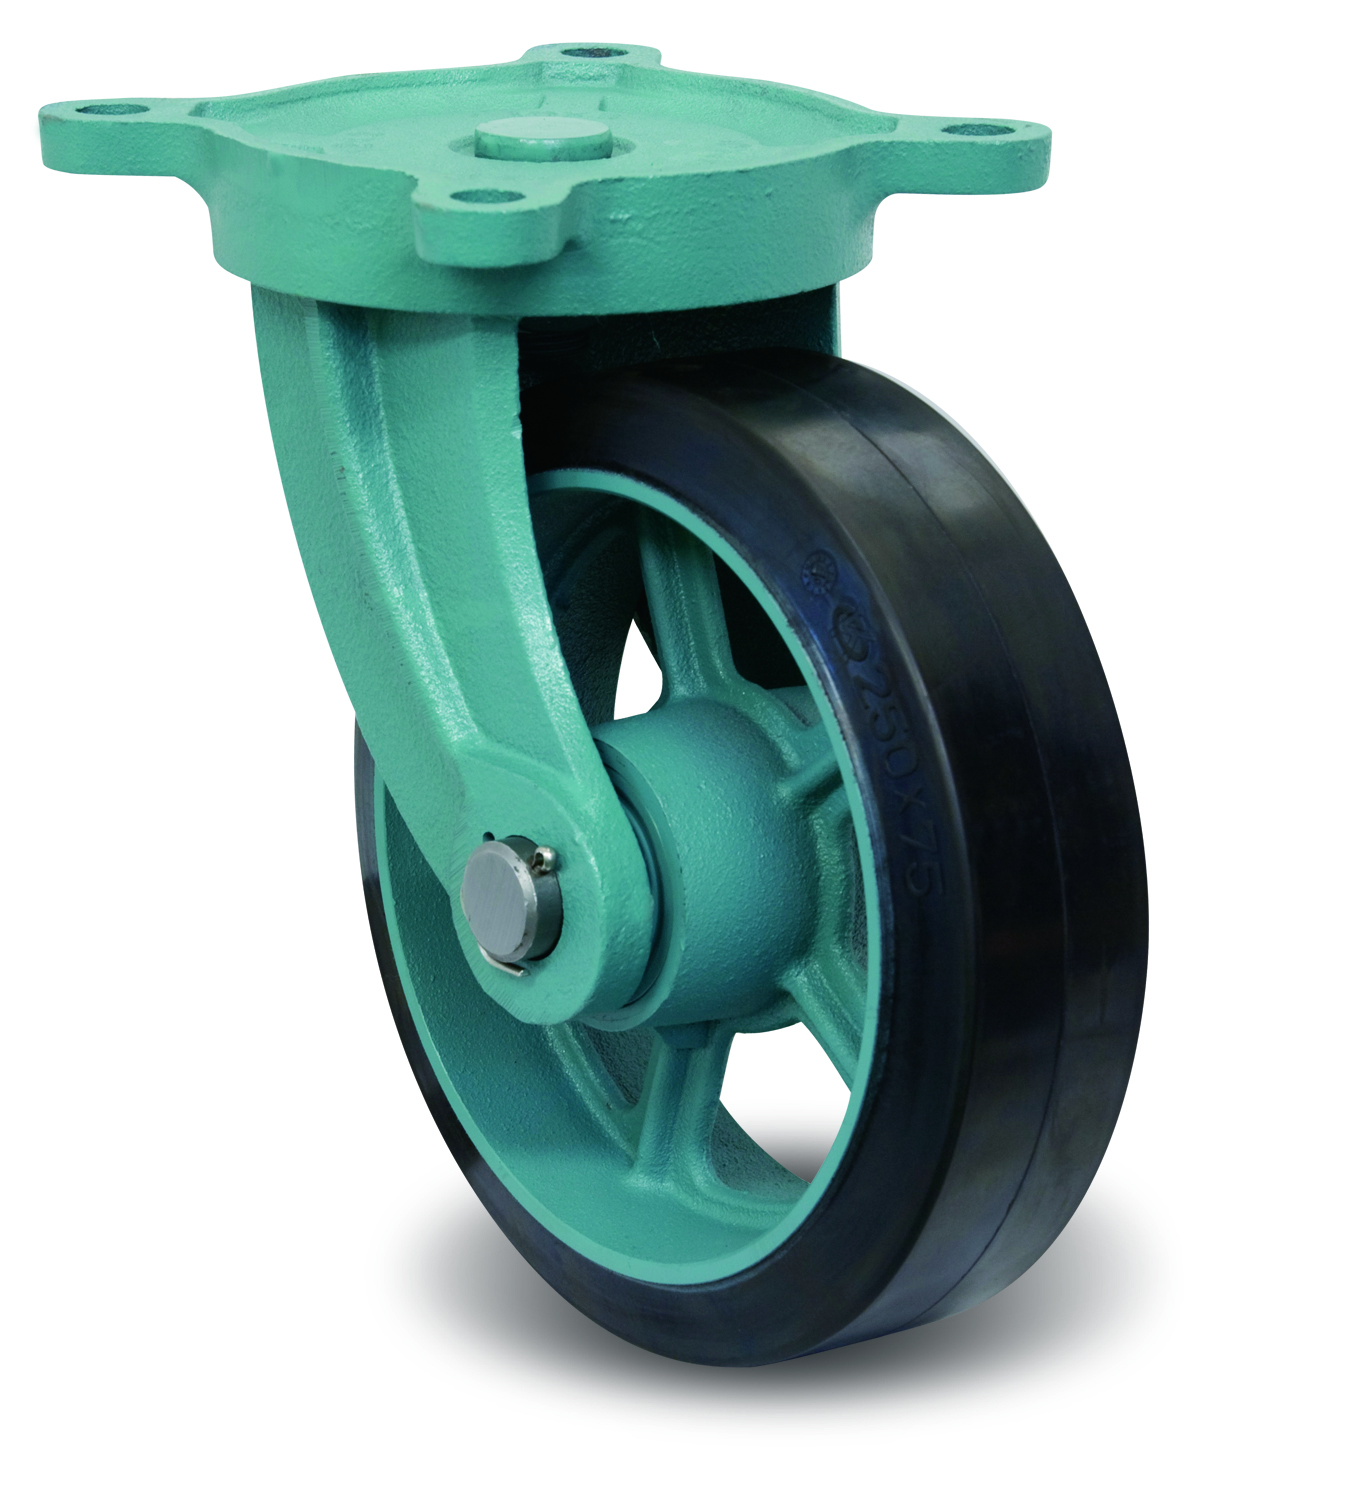 Casters - Rubber with Ductile Steel Swivel Plate, MG-O Series with Bracket, E/MG-O Series. EMG-O200X90